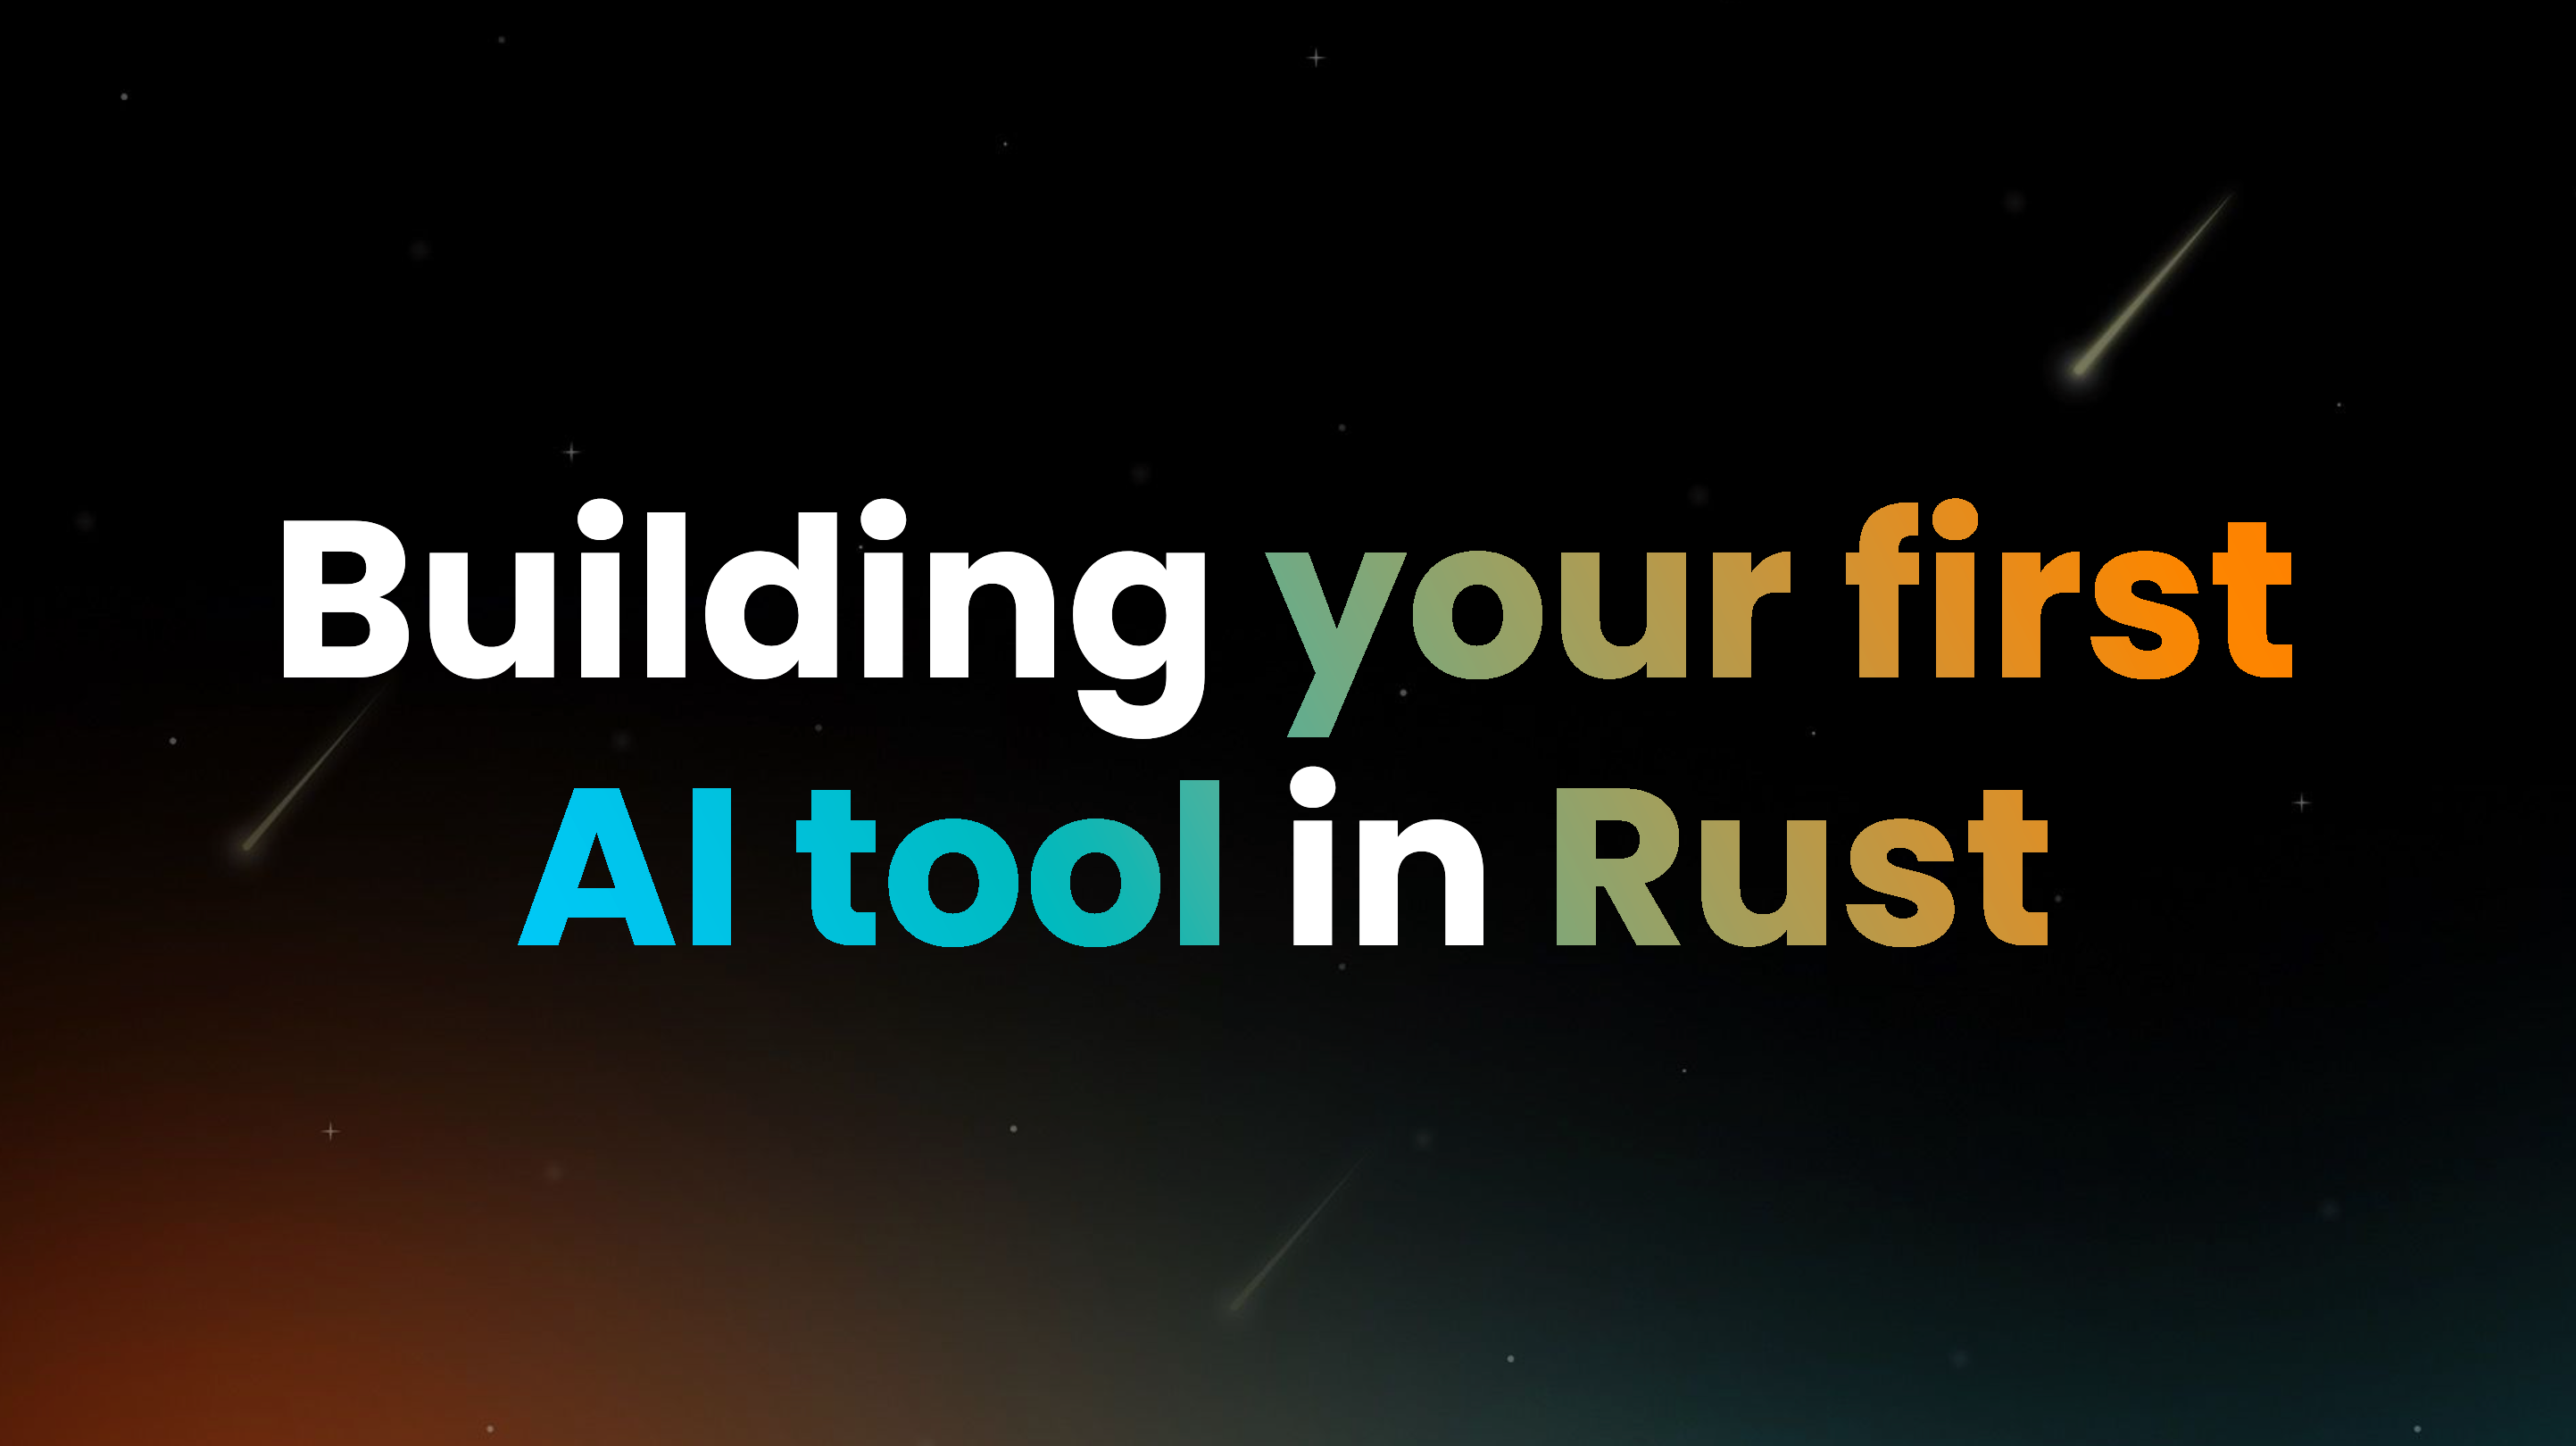 Building your first AI tool in Rust